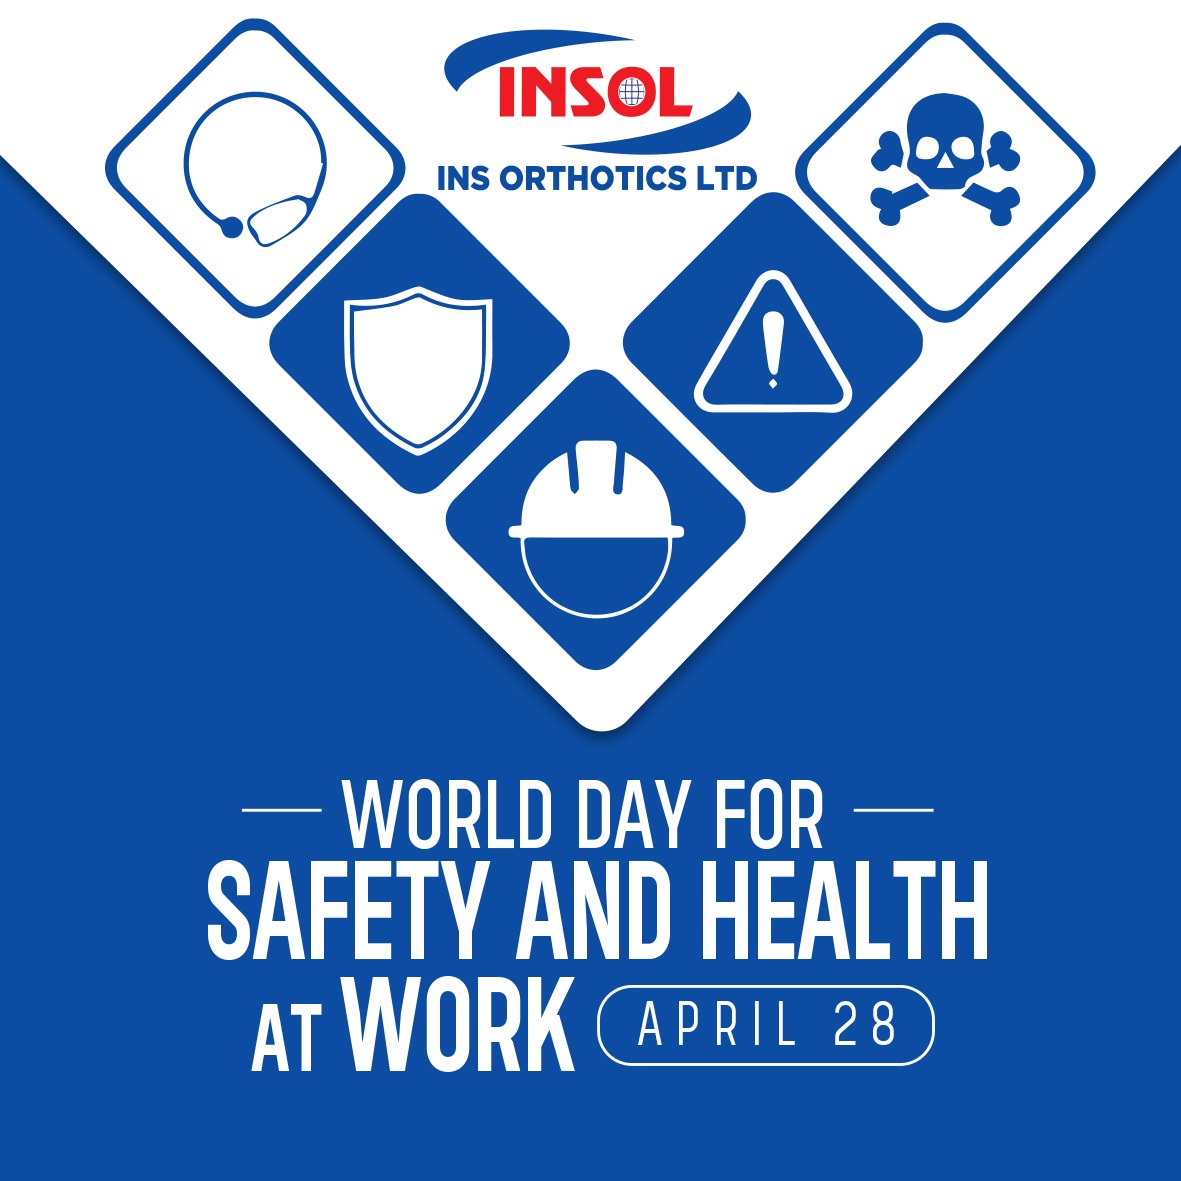 April 28th is #WorldDayForSafetyAndHealthAtWork. Let's raise awareness about workplace safety, prevent accidents & diseases, and create safe environments for all employees. #WorkplaceSafety #HealthAtWork #worlddayforsafetyandhealthatwork